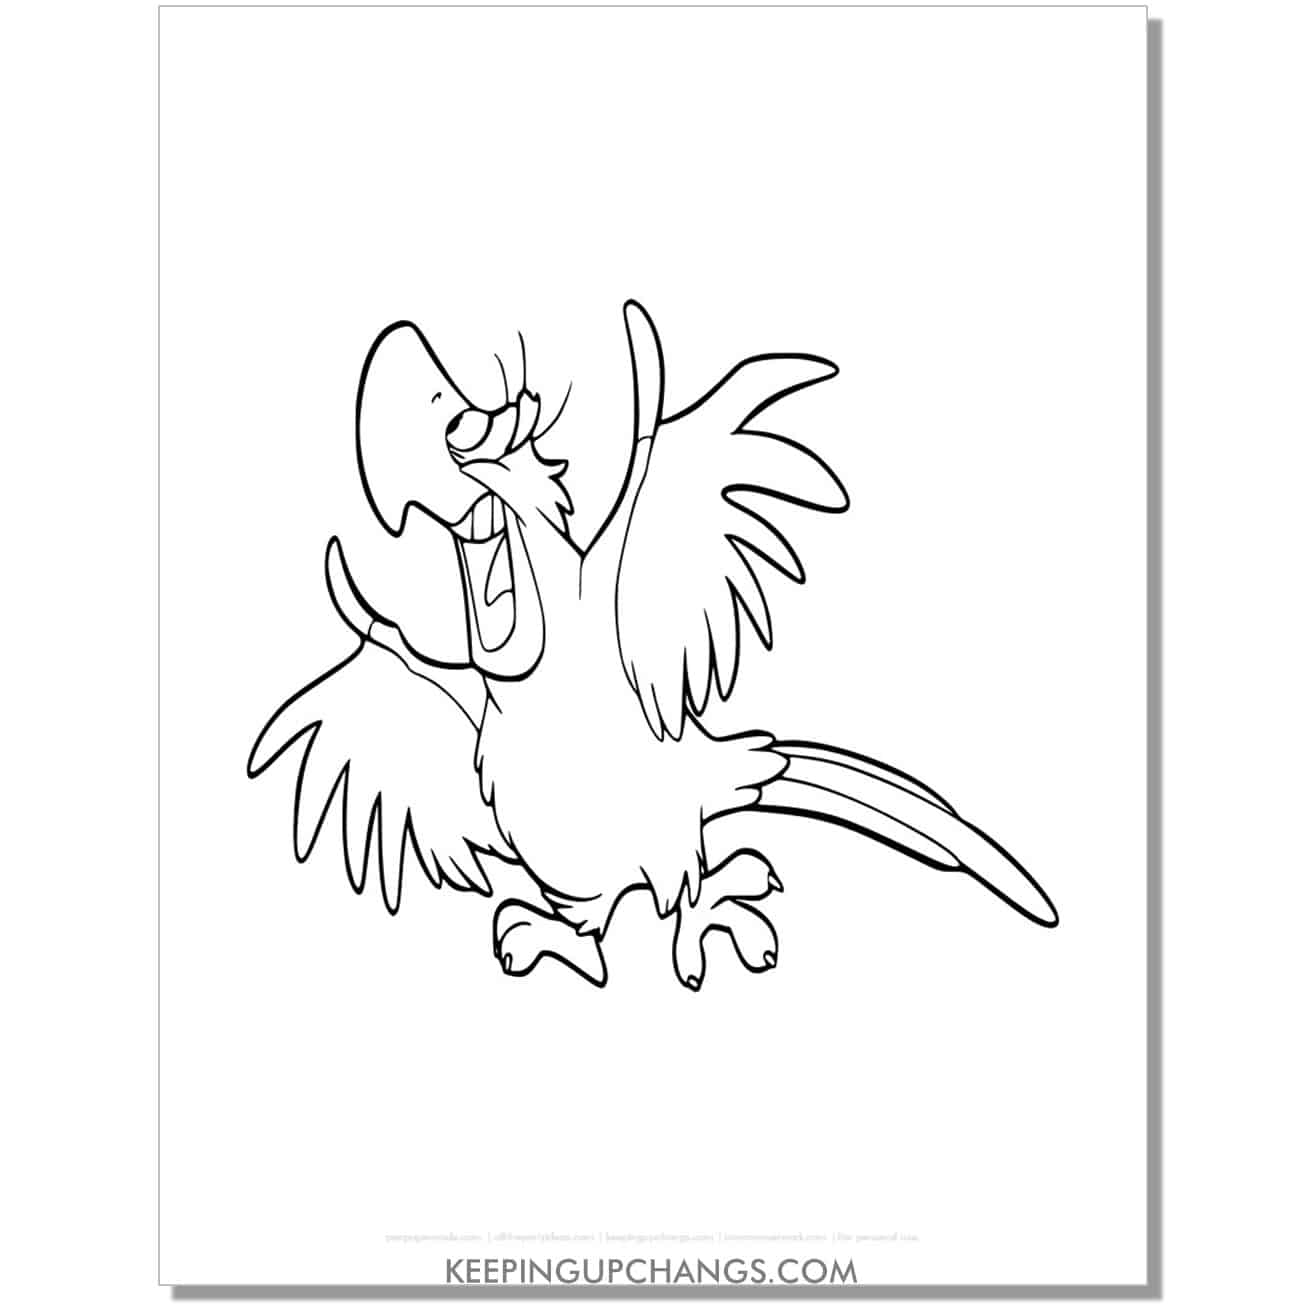 aladdin iago excited coloring page, sheet.